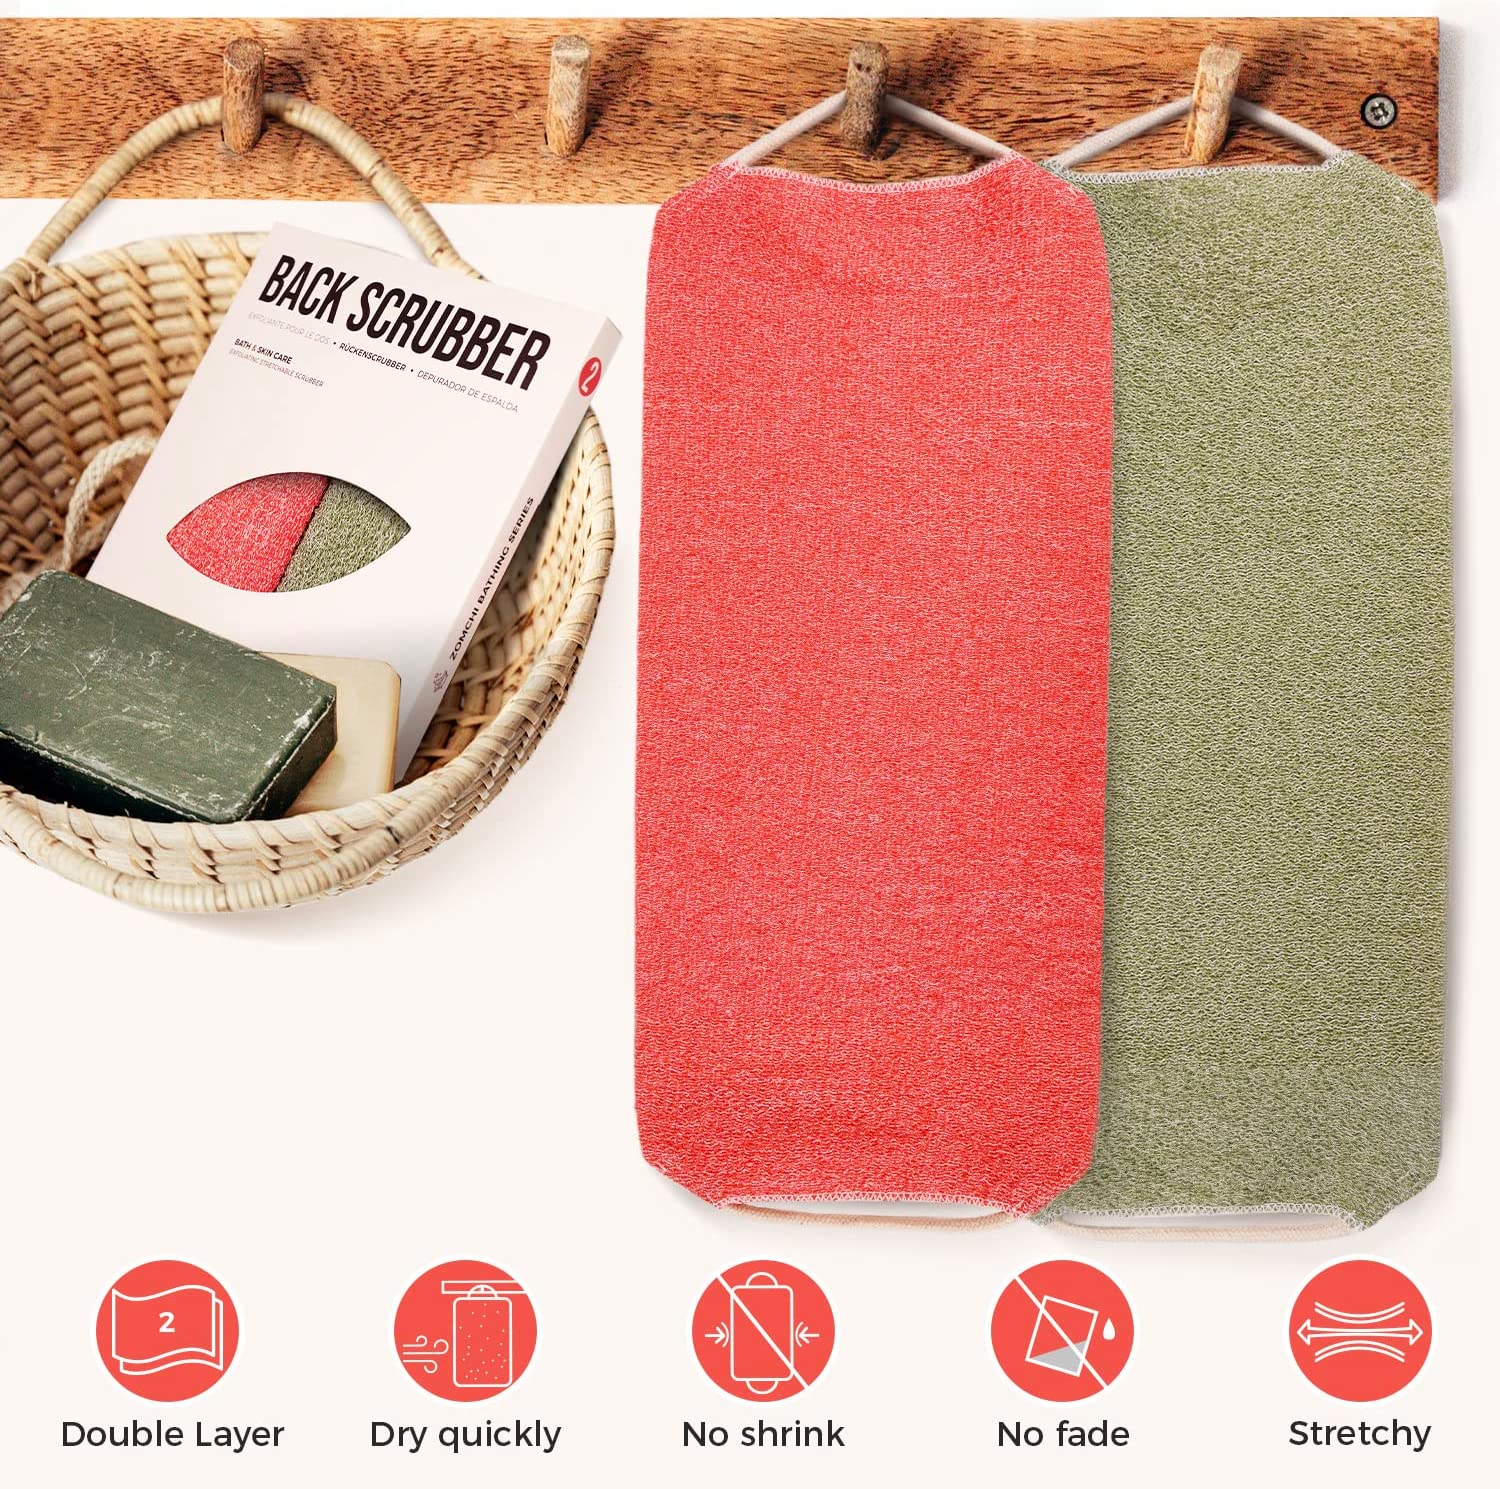 Back Scrubber Hand In Eco-Friendly Wooden Rack